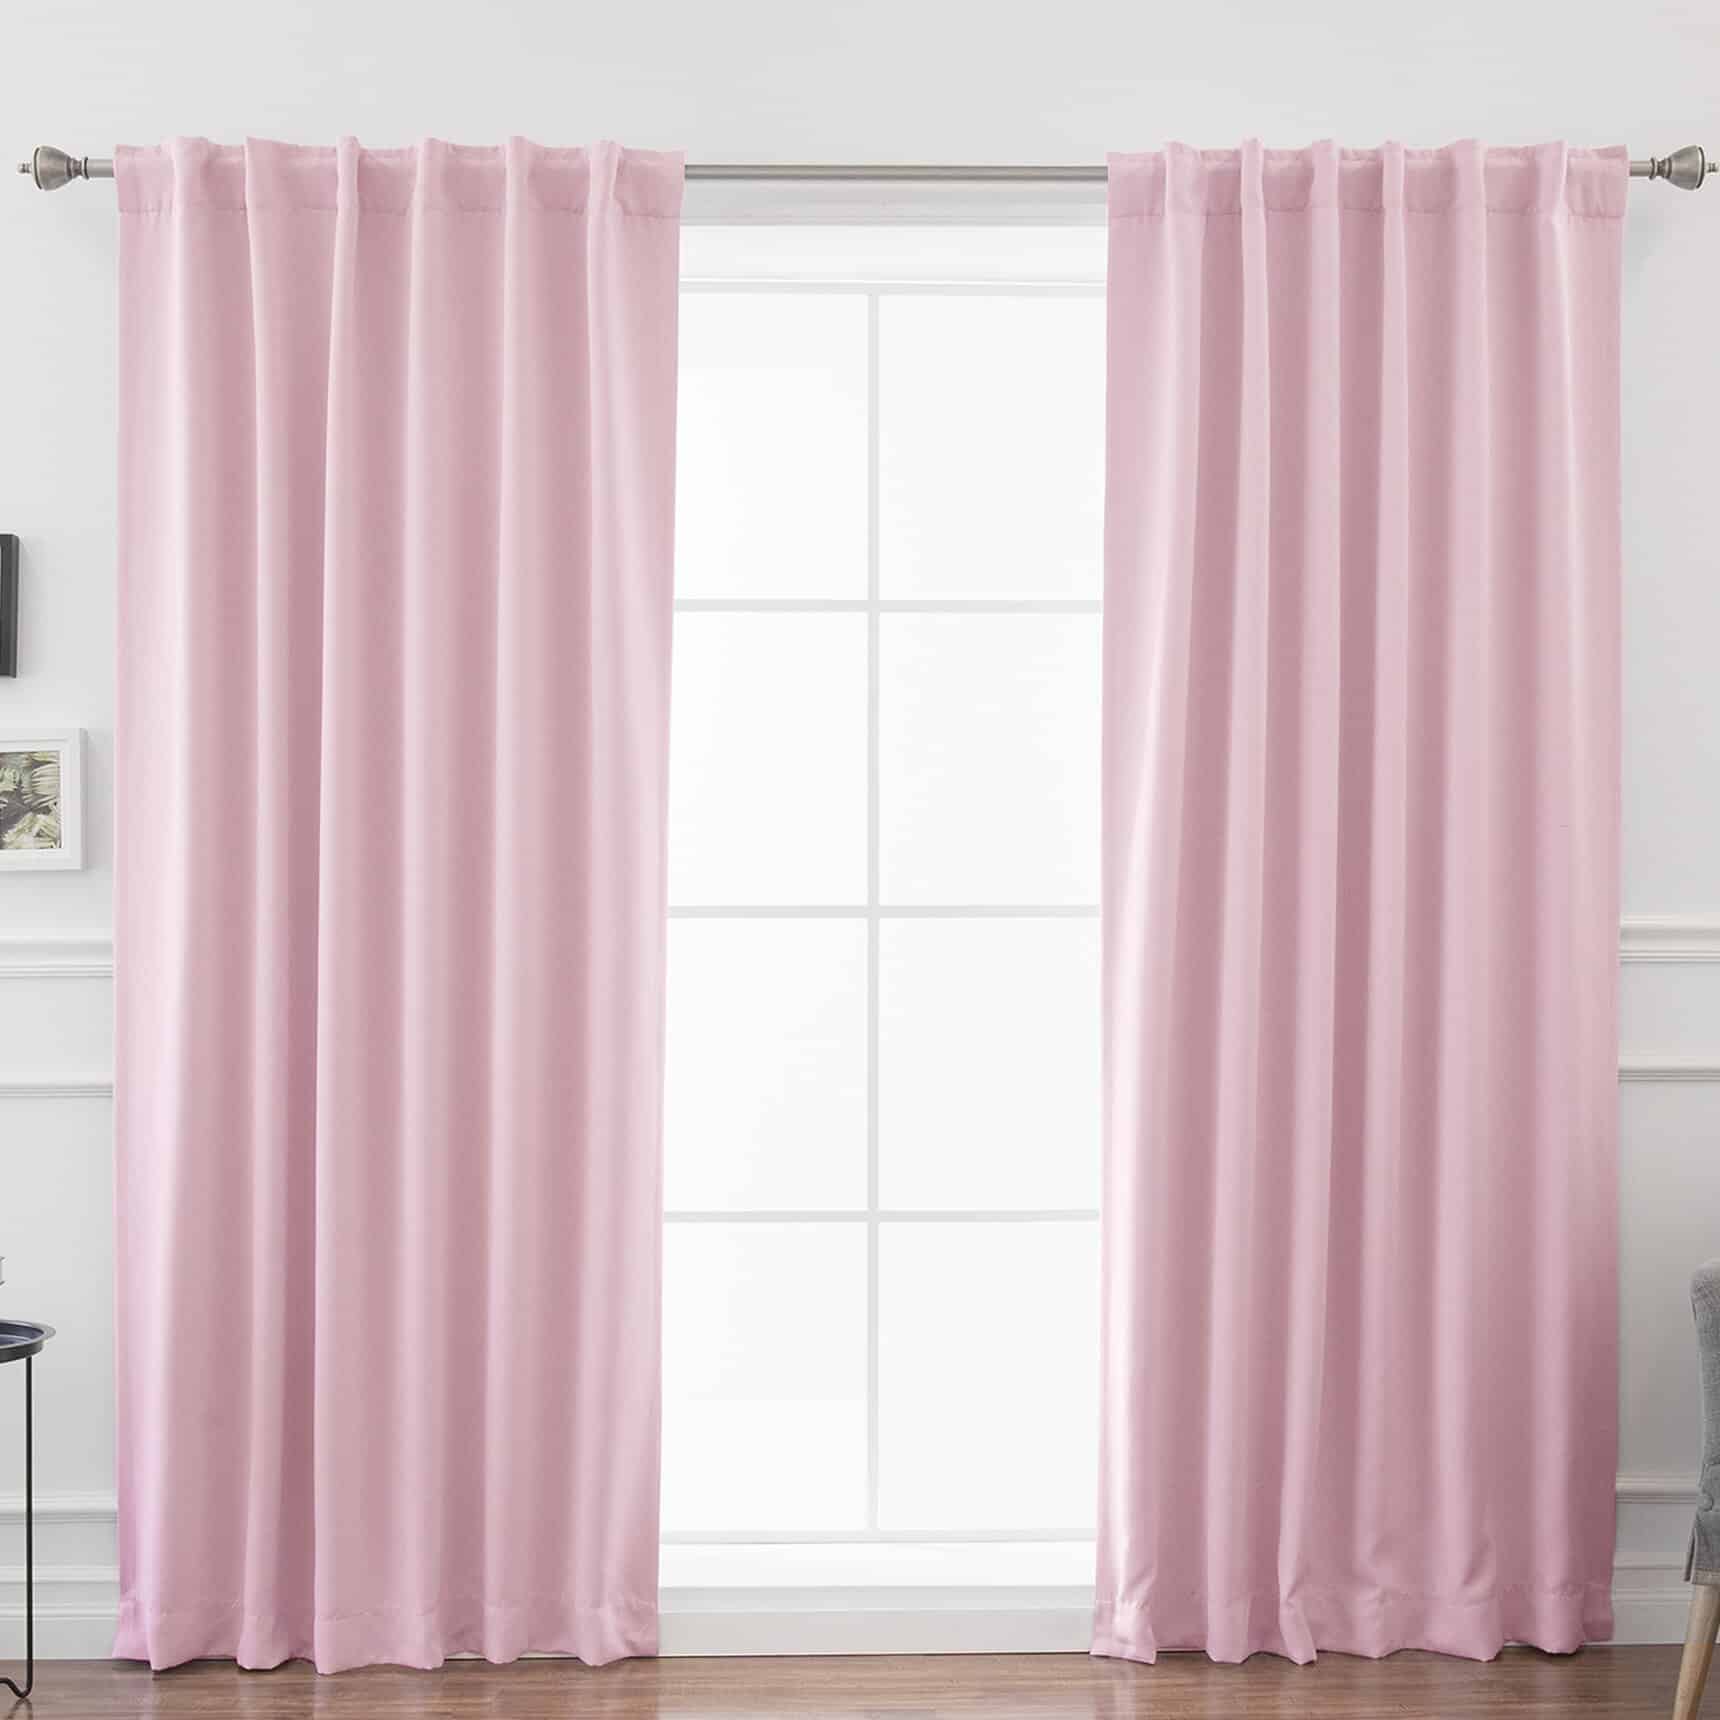 Baby Pink Curtains Look Great With White Walls